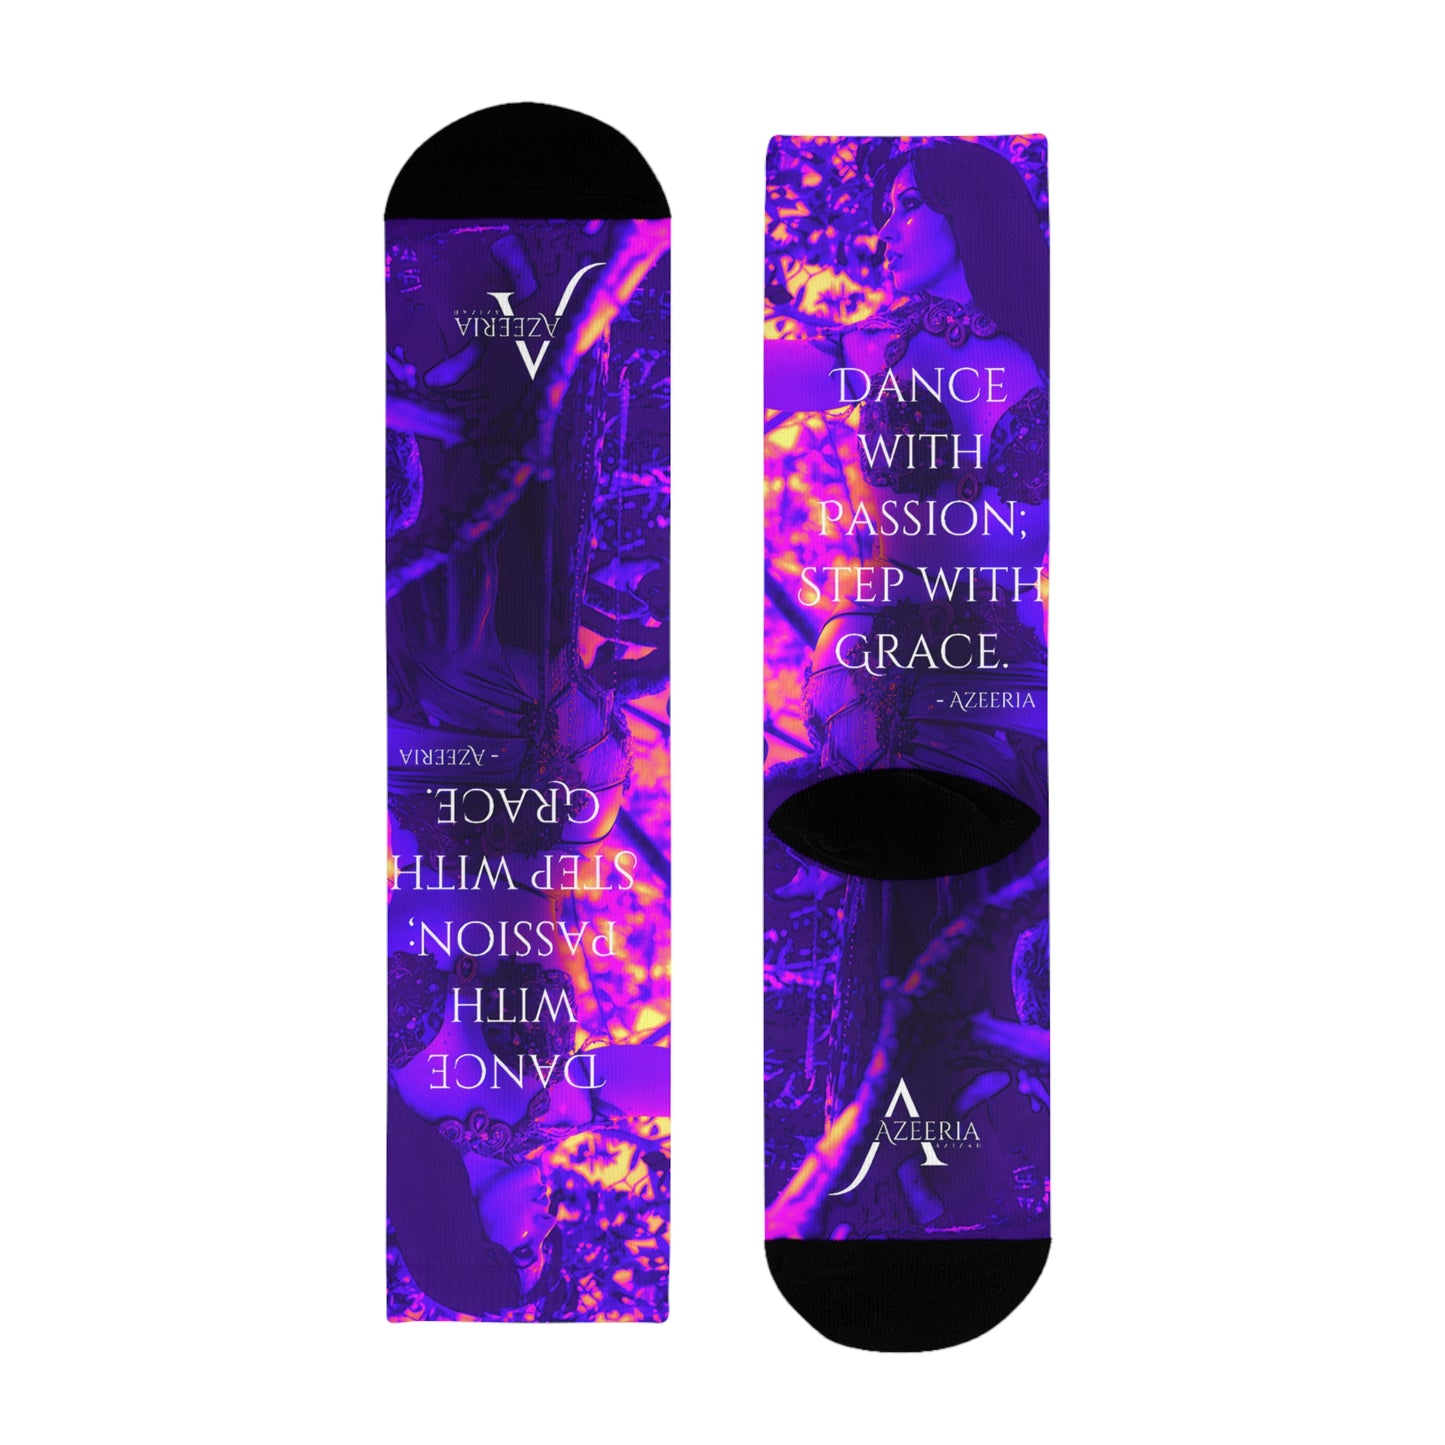 "Step with Passion" Sublimation Crew Socks